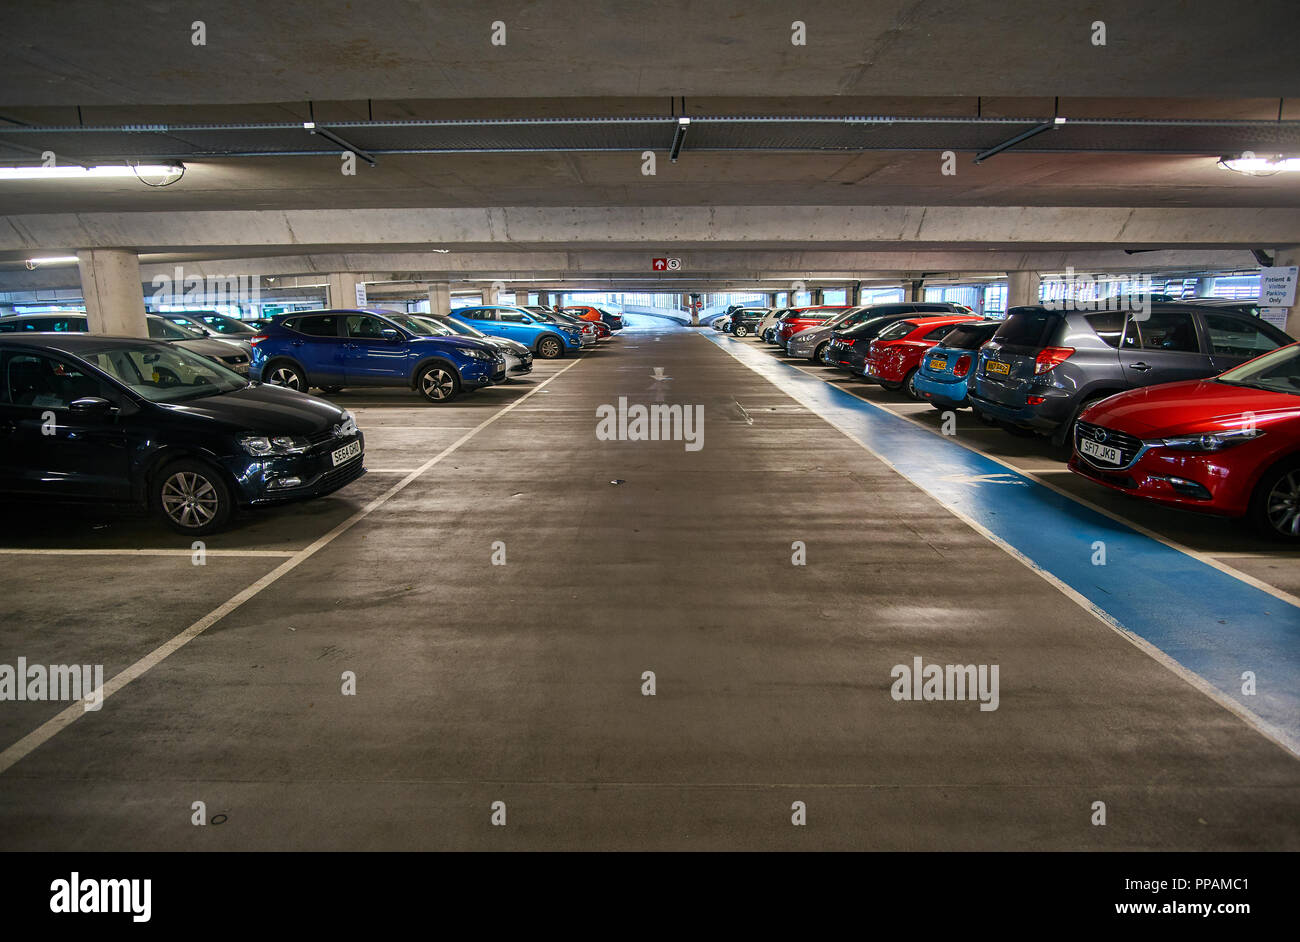 Underground multi storey car park / parking garage with cars parked on both sides. Stock Photo